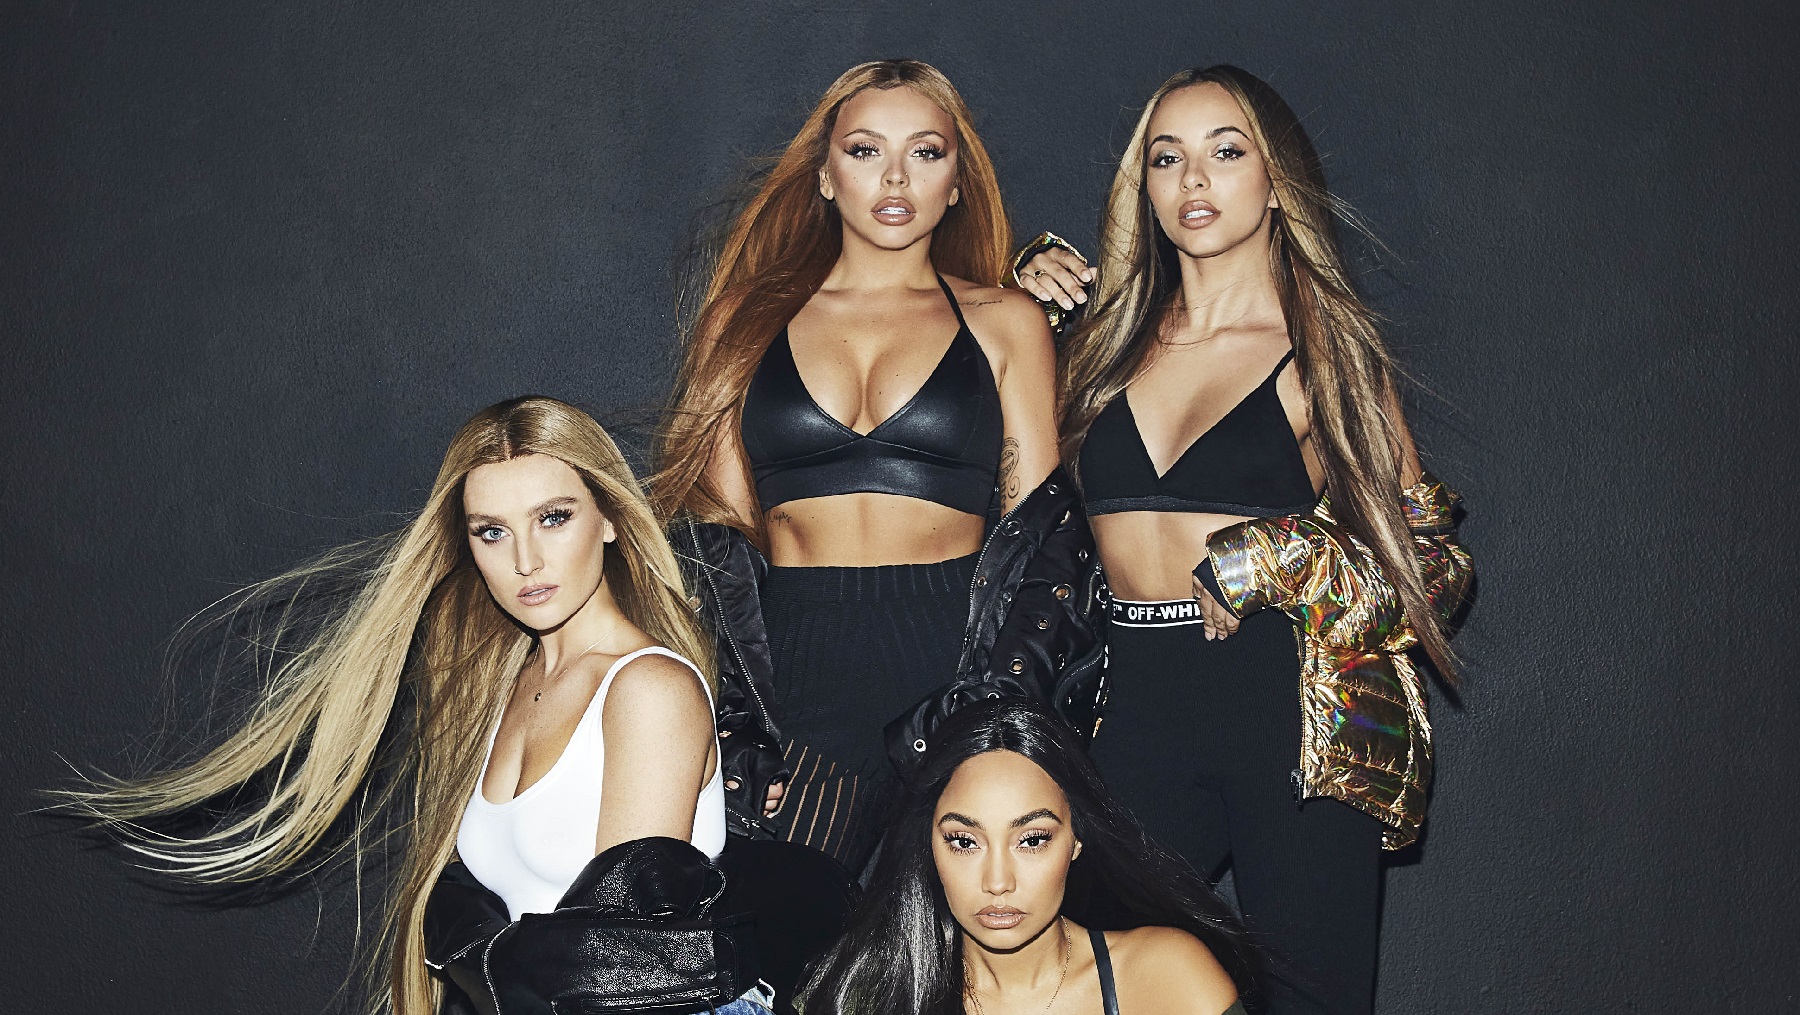 Little Mix battle stereotypes in 'Woman Like Me' video - Capital